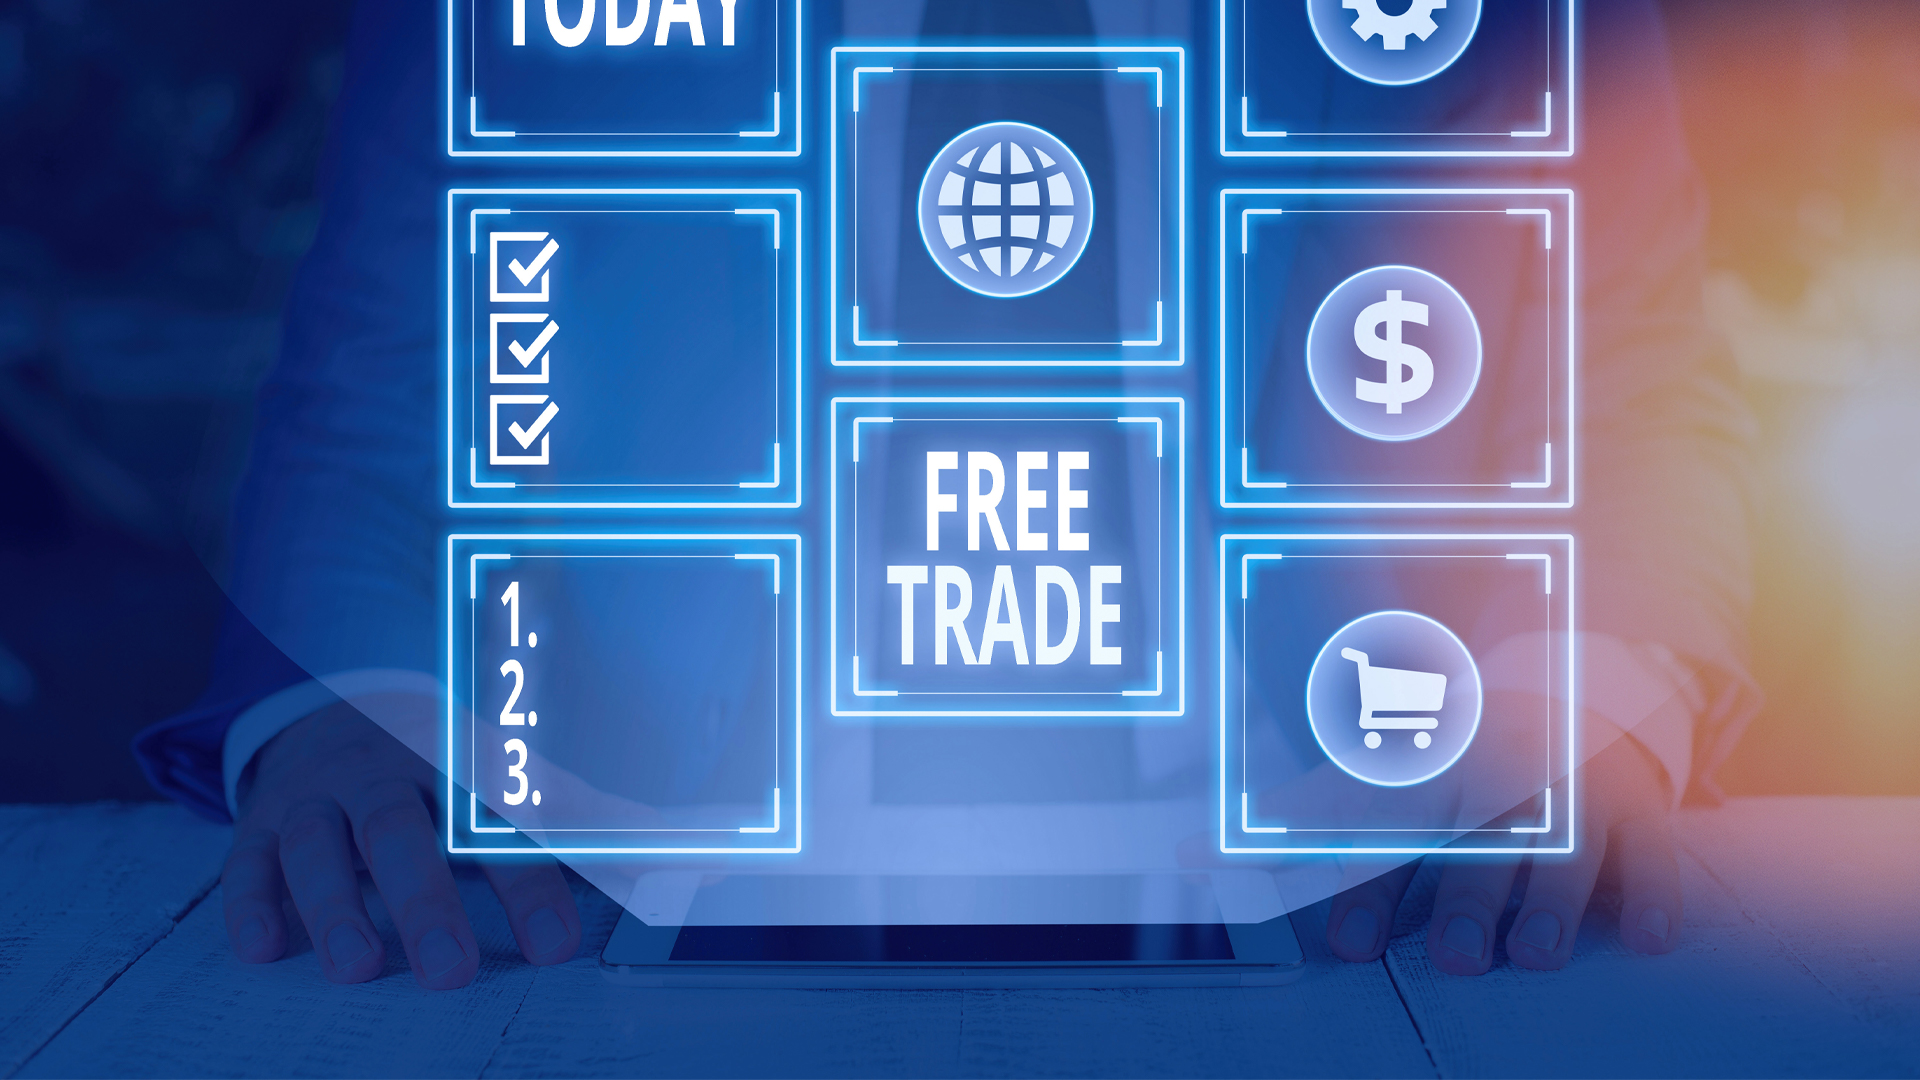 Writing note showing Free Trade. Business concept for international trade left to its natural course without tariffs Image